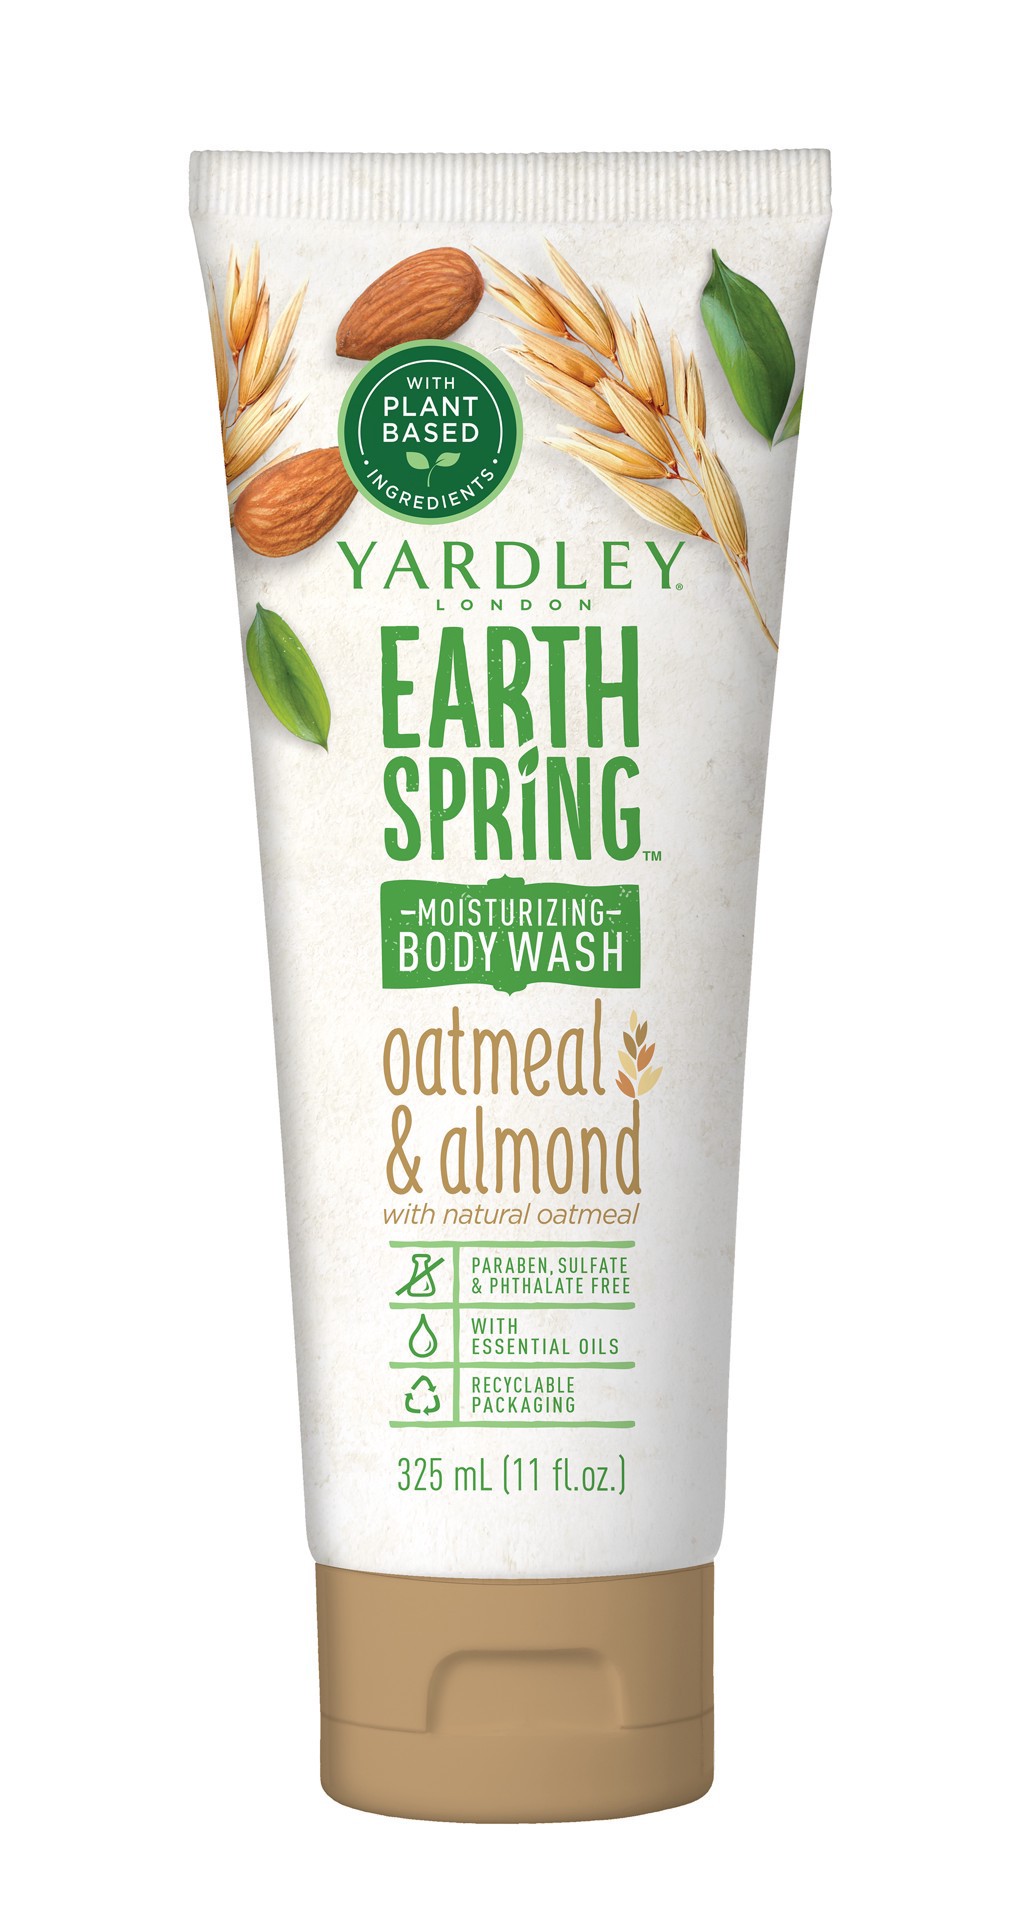 slide 1 of 2, Yardley London Earth Spring Body Wash, Oatmeal & Almond With Natural Oatmeal, 11 oz